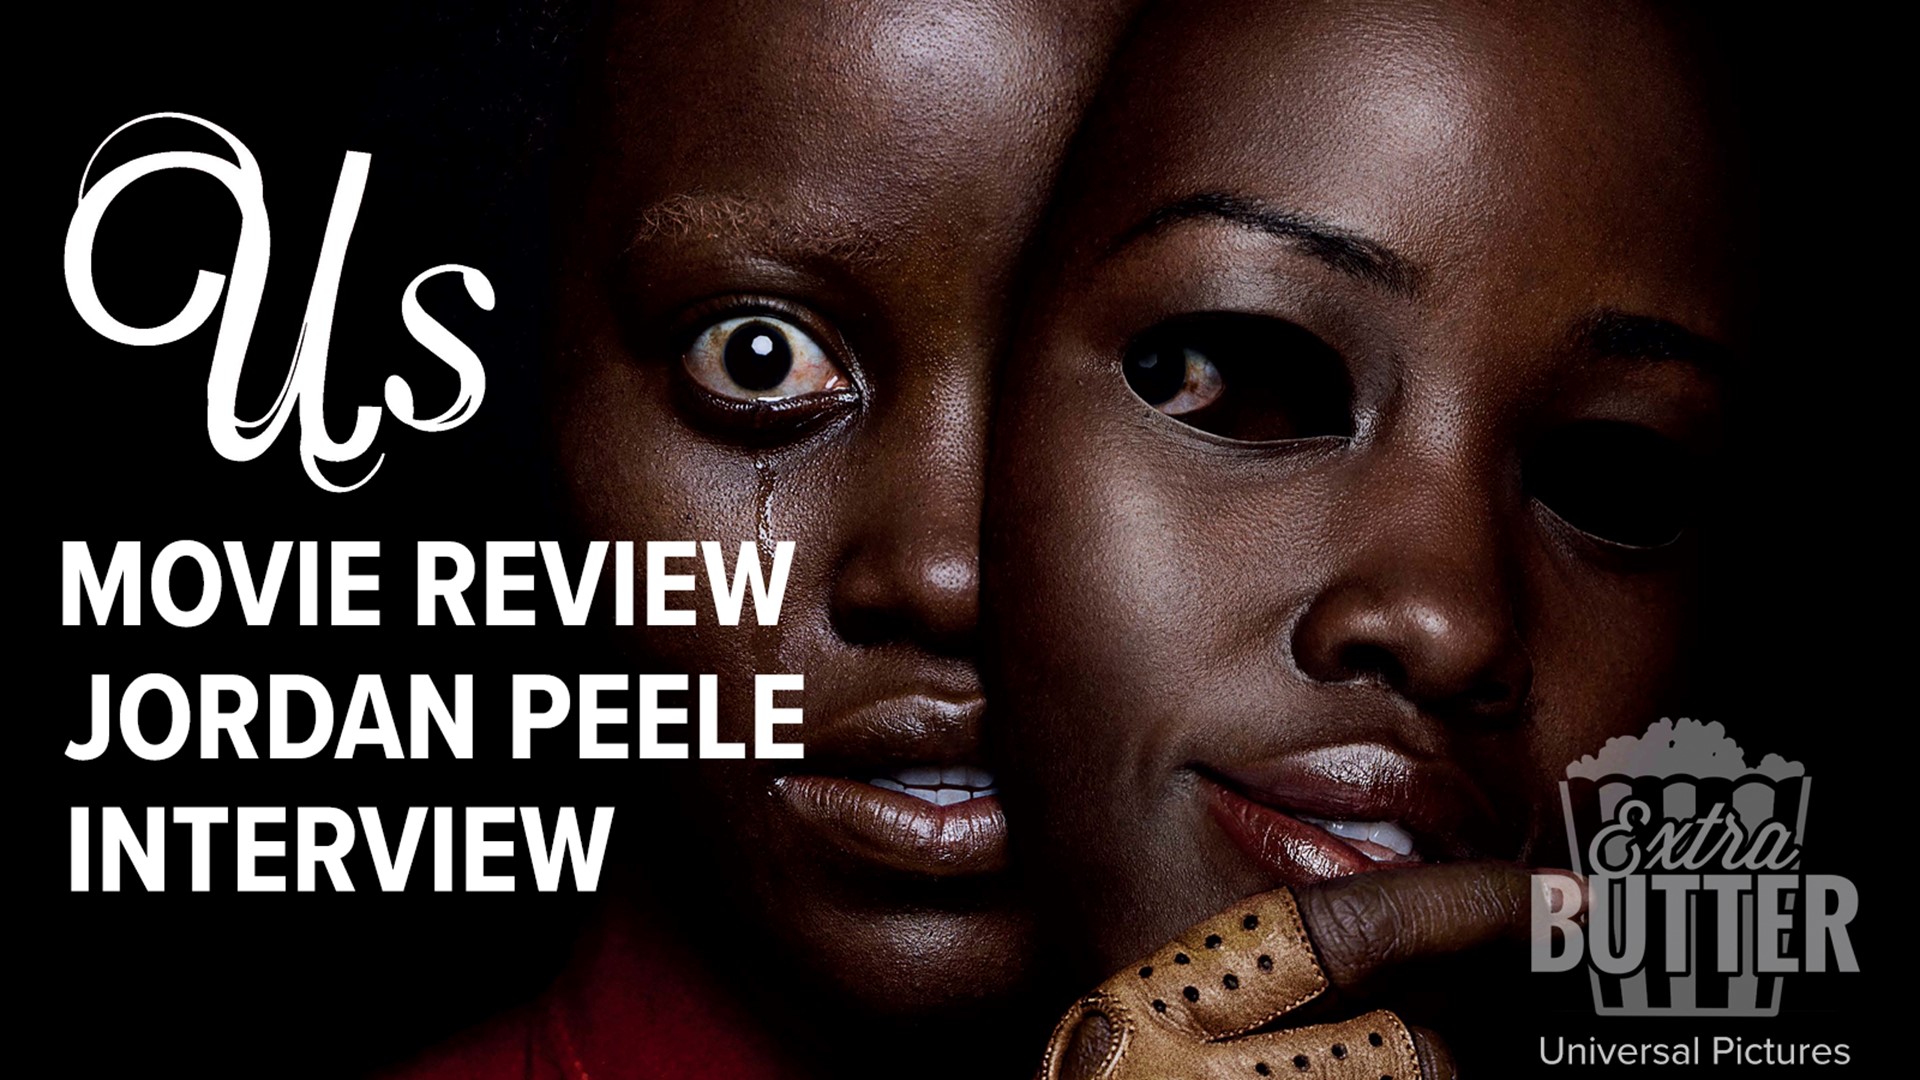 Jordan Peele talks about easter eggs in 'Us' and 'Get Out' - and trolling the internet to see what people are saying. He also talks about the music in 'Us.' Members of the upcoming film, 'El Chicano' weigh in on both films. Hear from Aimee Garcia (Lucifer, George Lopez), Joe Carnahan (Smokin' Aces, The A-Team), and director Ben Hernandez Bray... along with Mark S. Allen and Maria Gloria.
Interviews provided by Briarcliff & Universal Pictures.